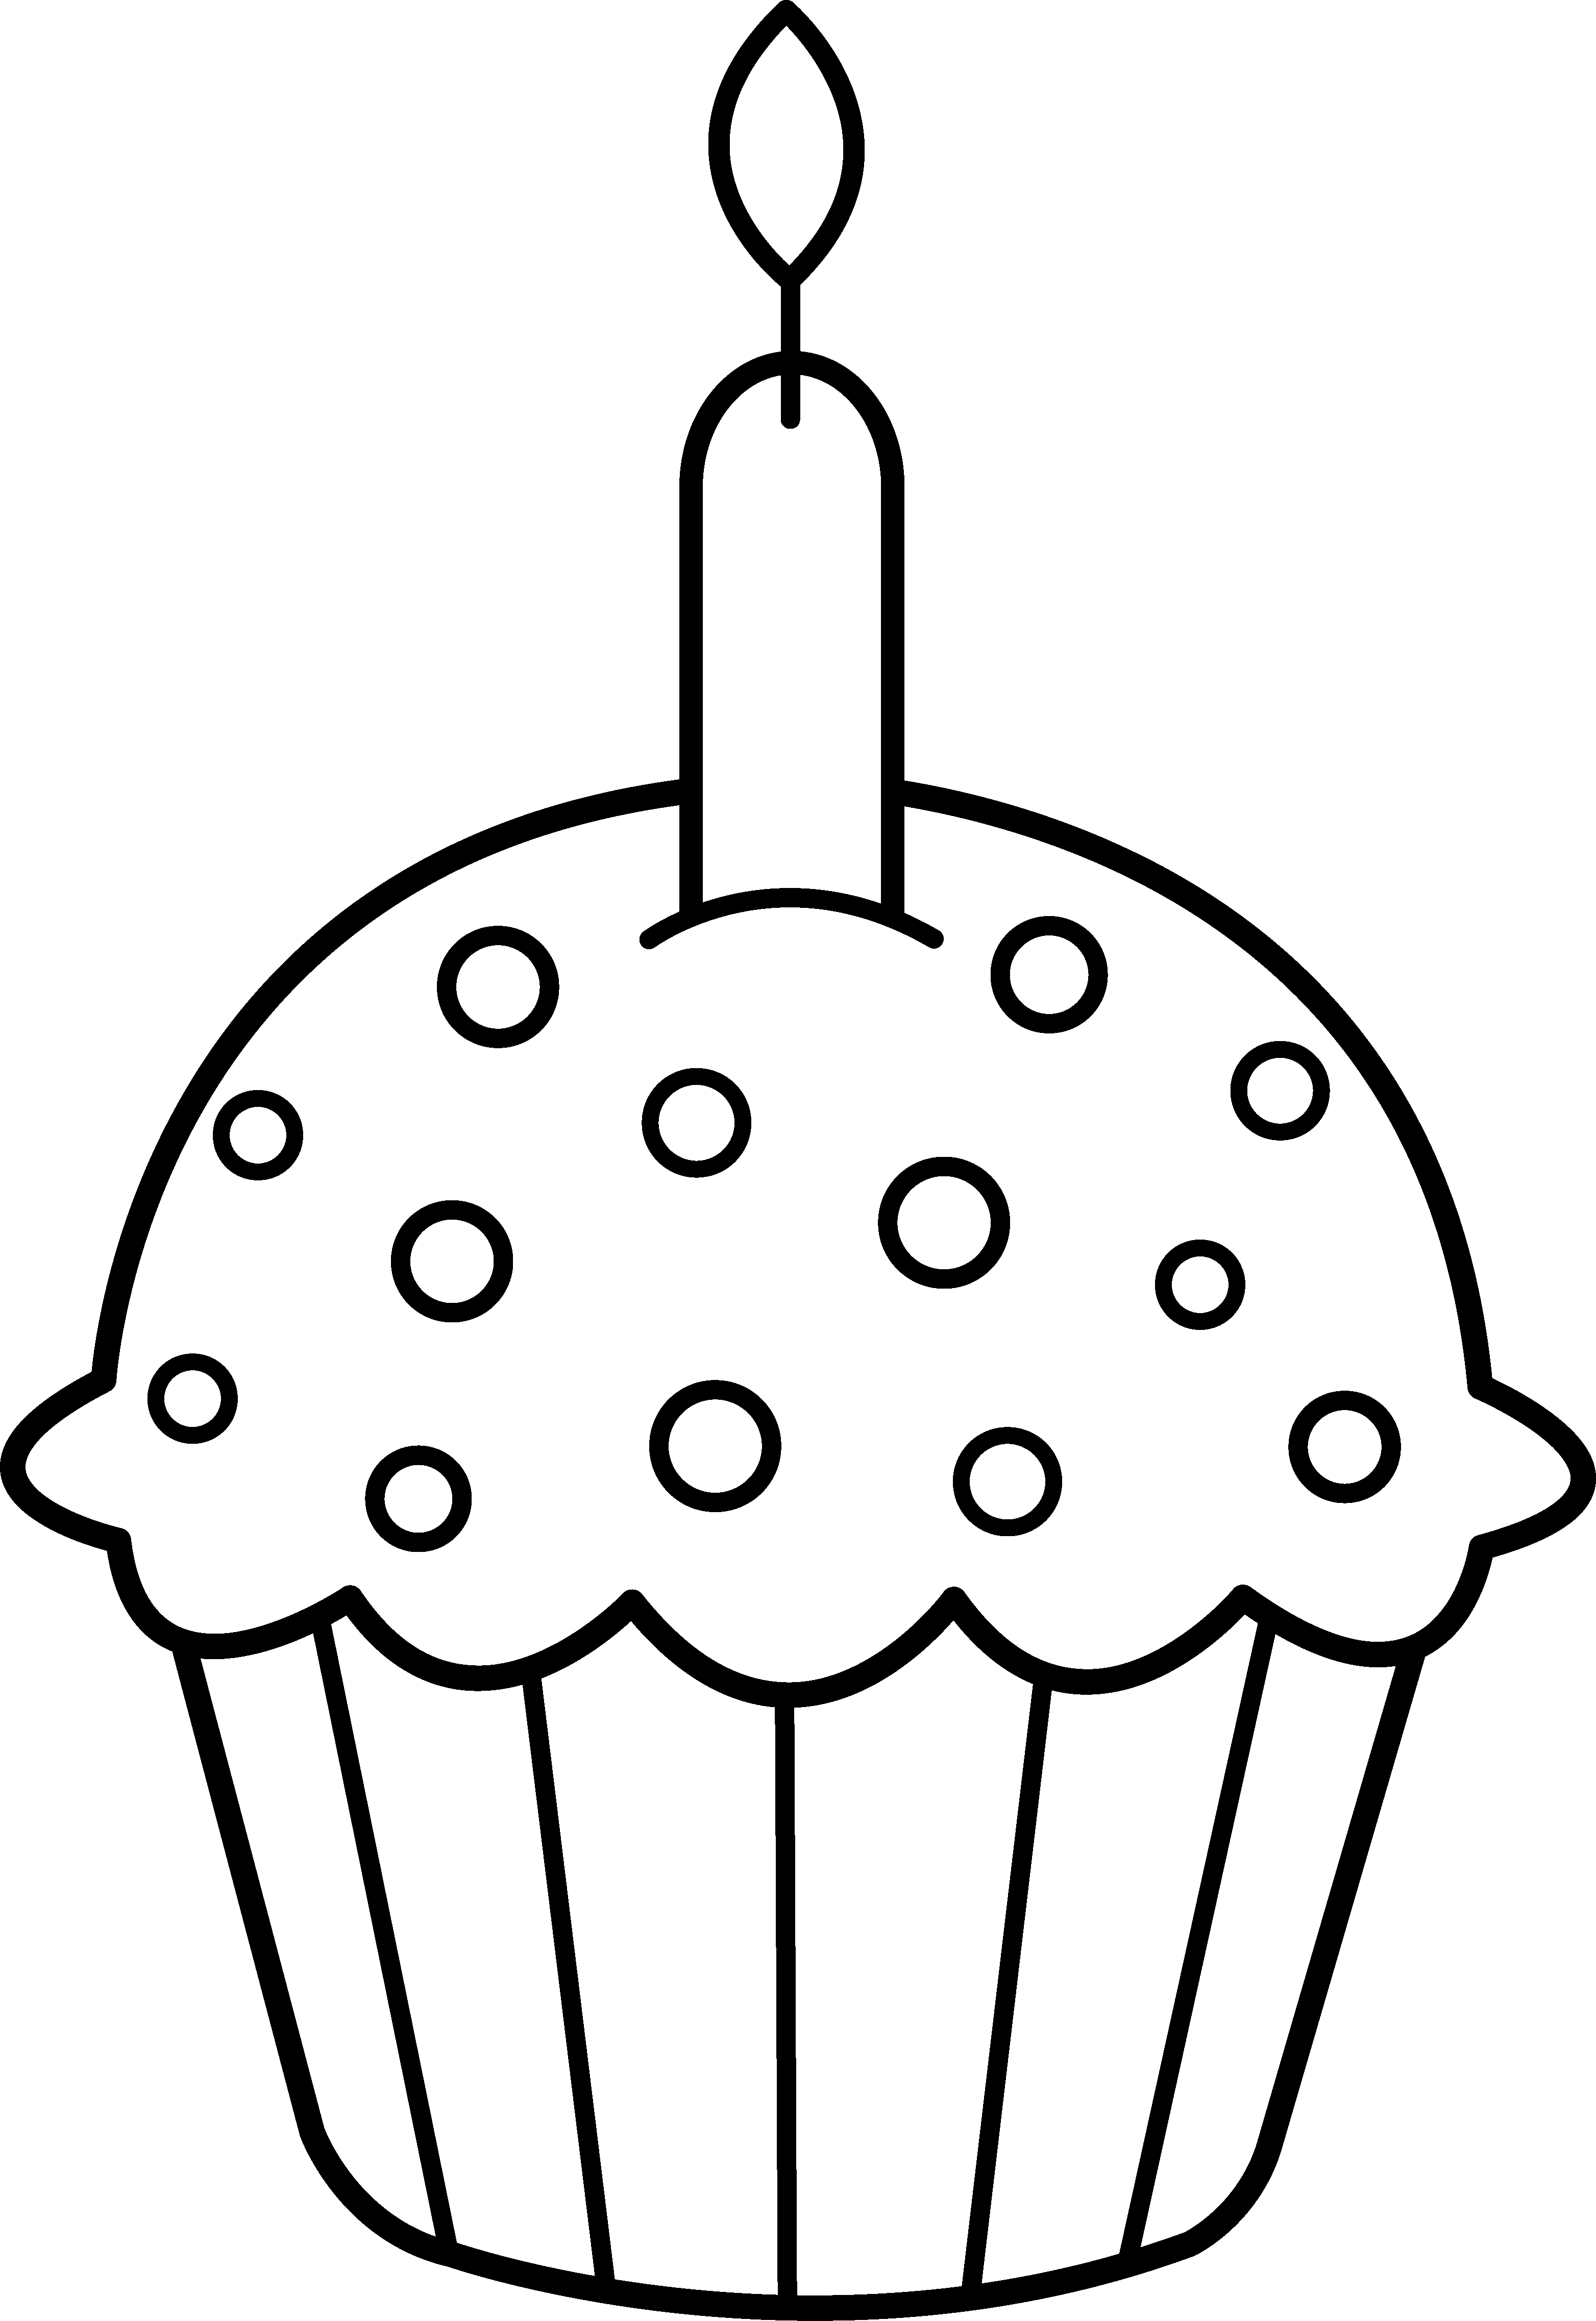 Best Cupcake Clipart Black And White #5232 - Clipartion.com